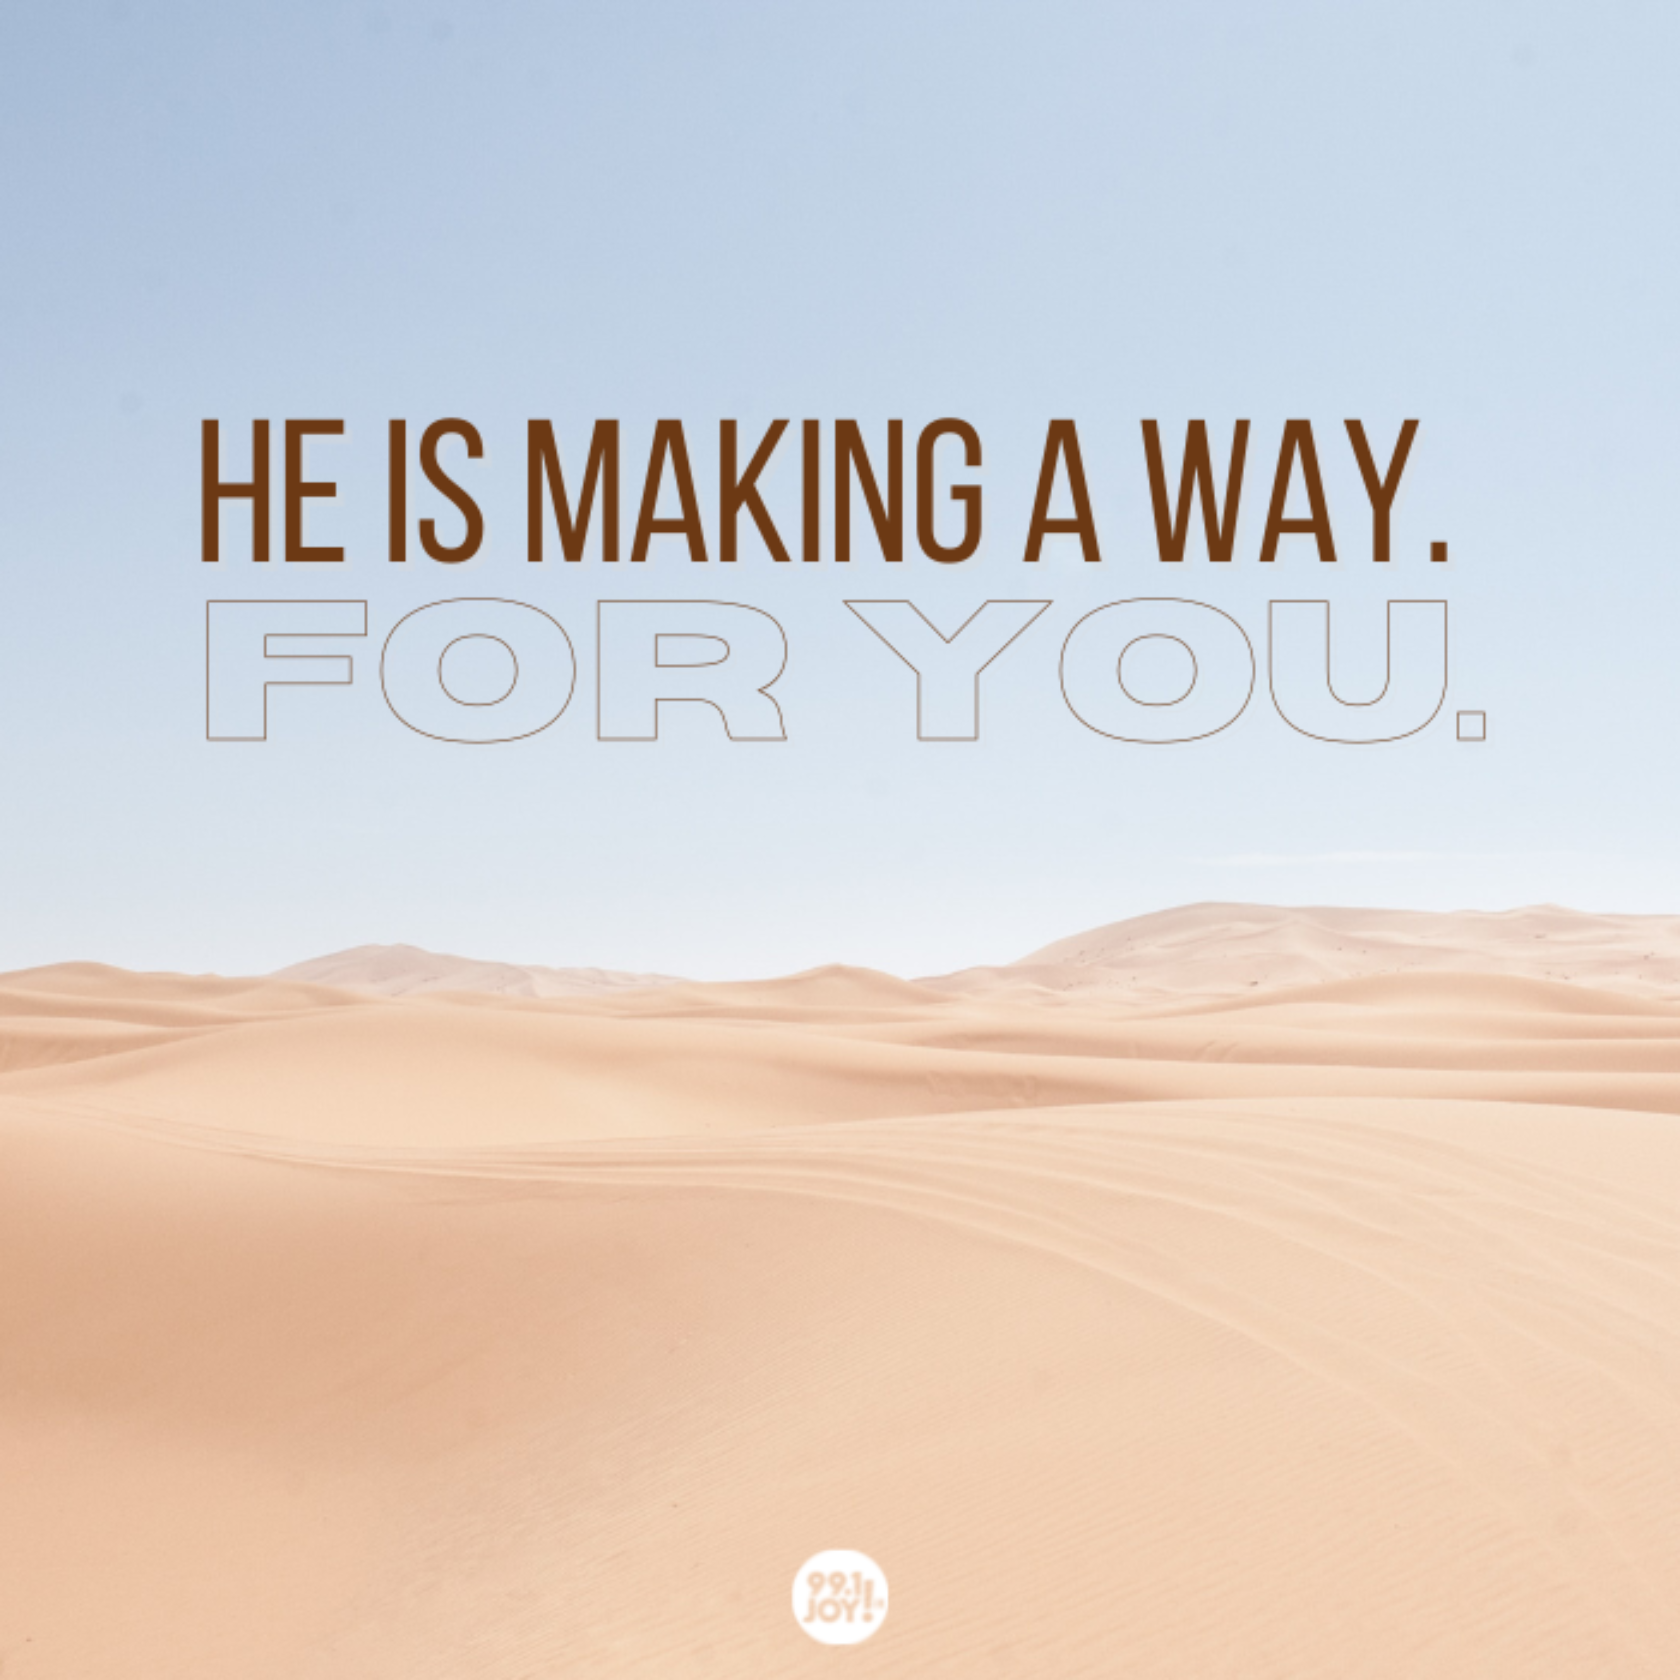 He Is Making A Way. For You.